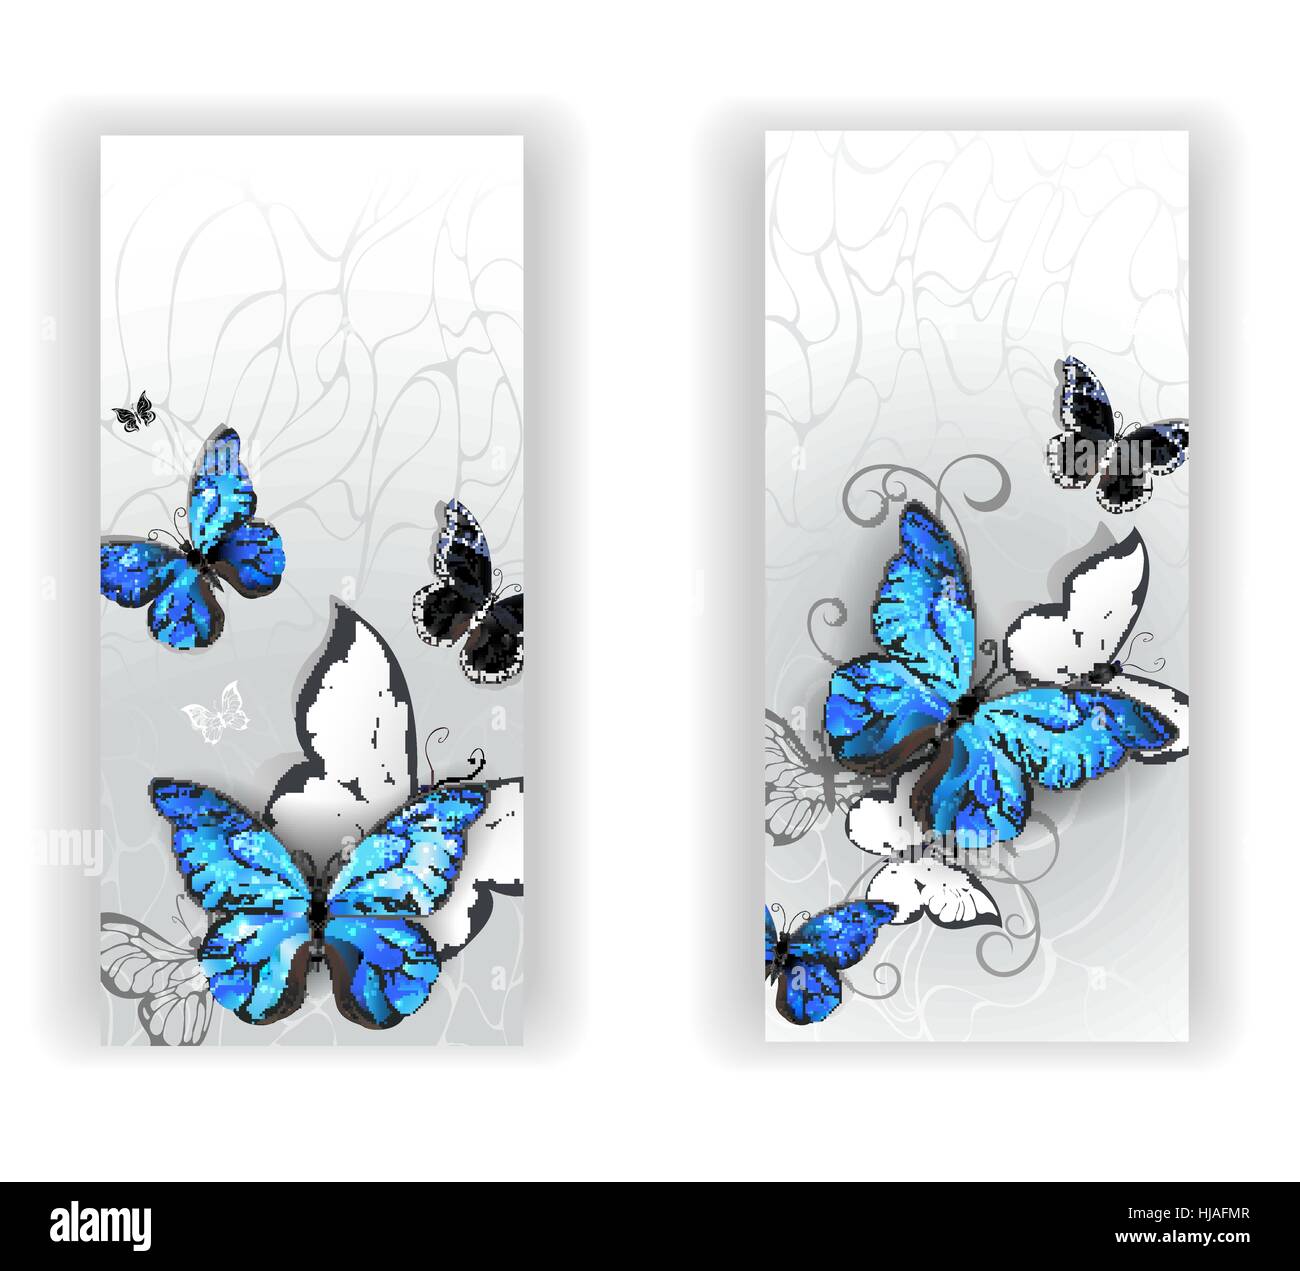 Two banners with blue butterflies morpho and black butterflies on gray textural background. Morpho. Stock Vector